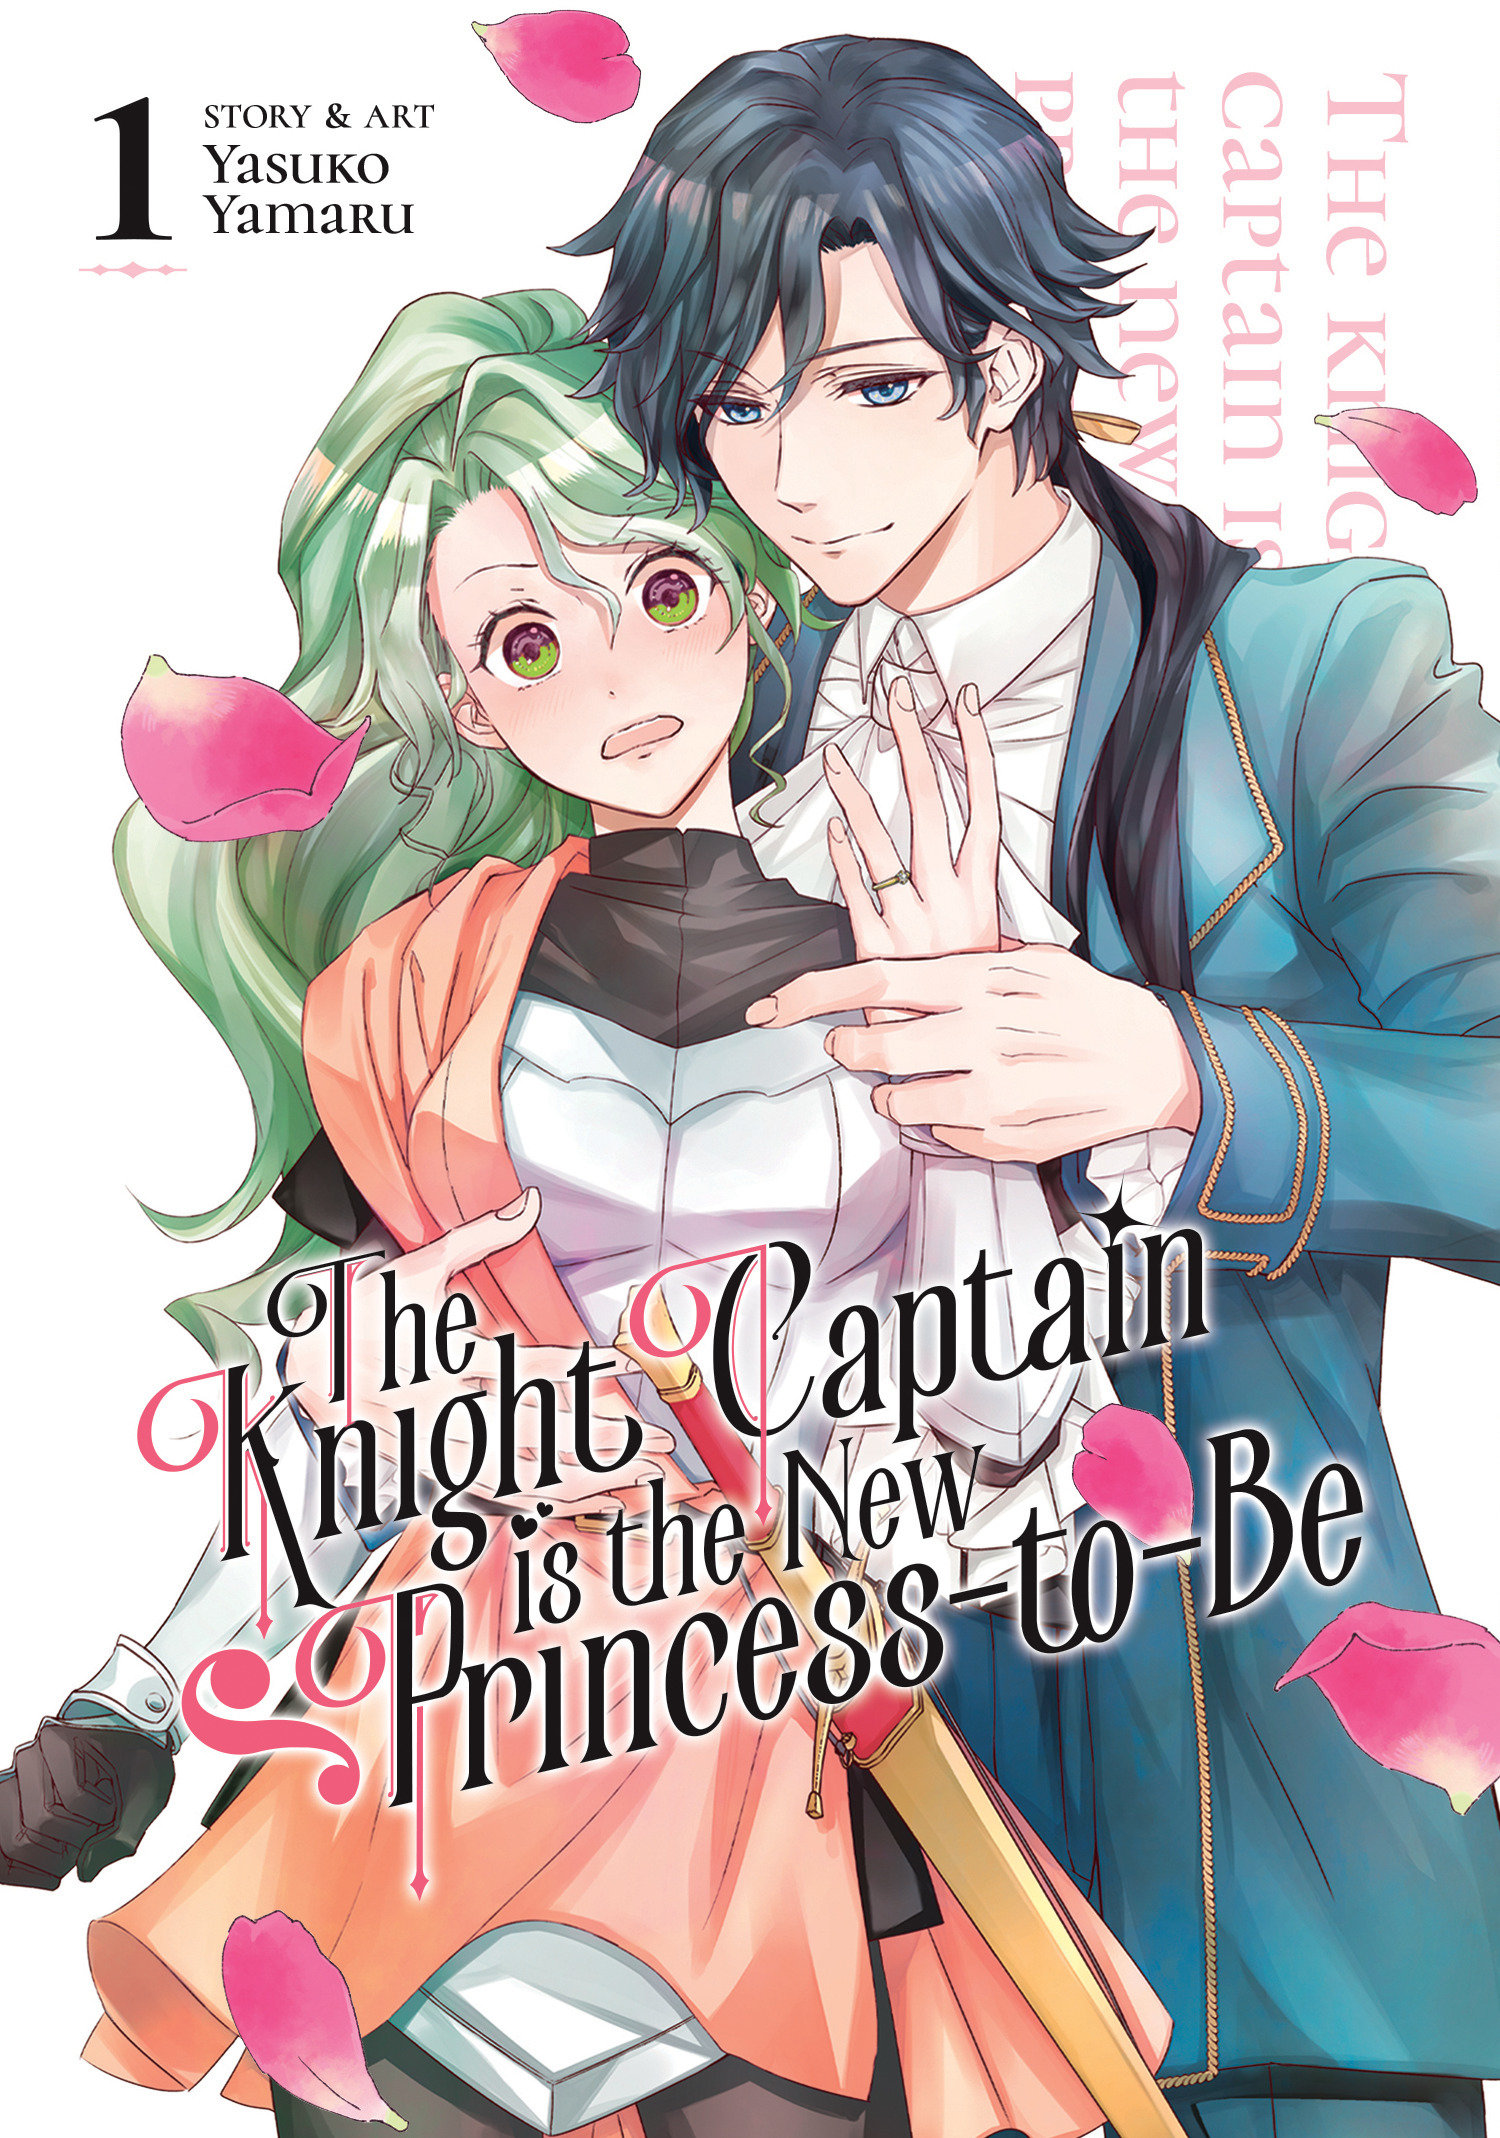 Knight Captain is the New Princess-To-Be Manga Volume 1